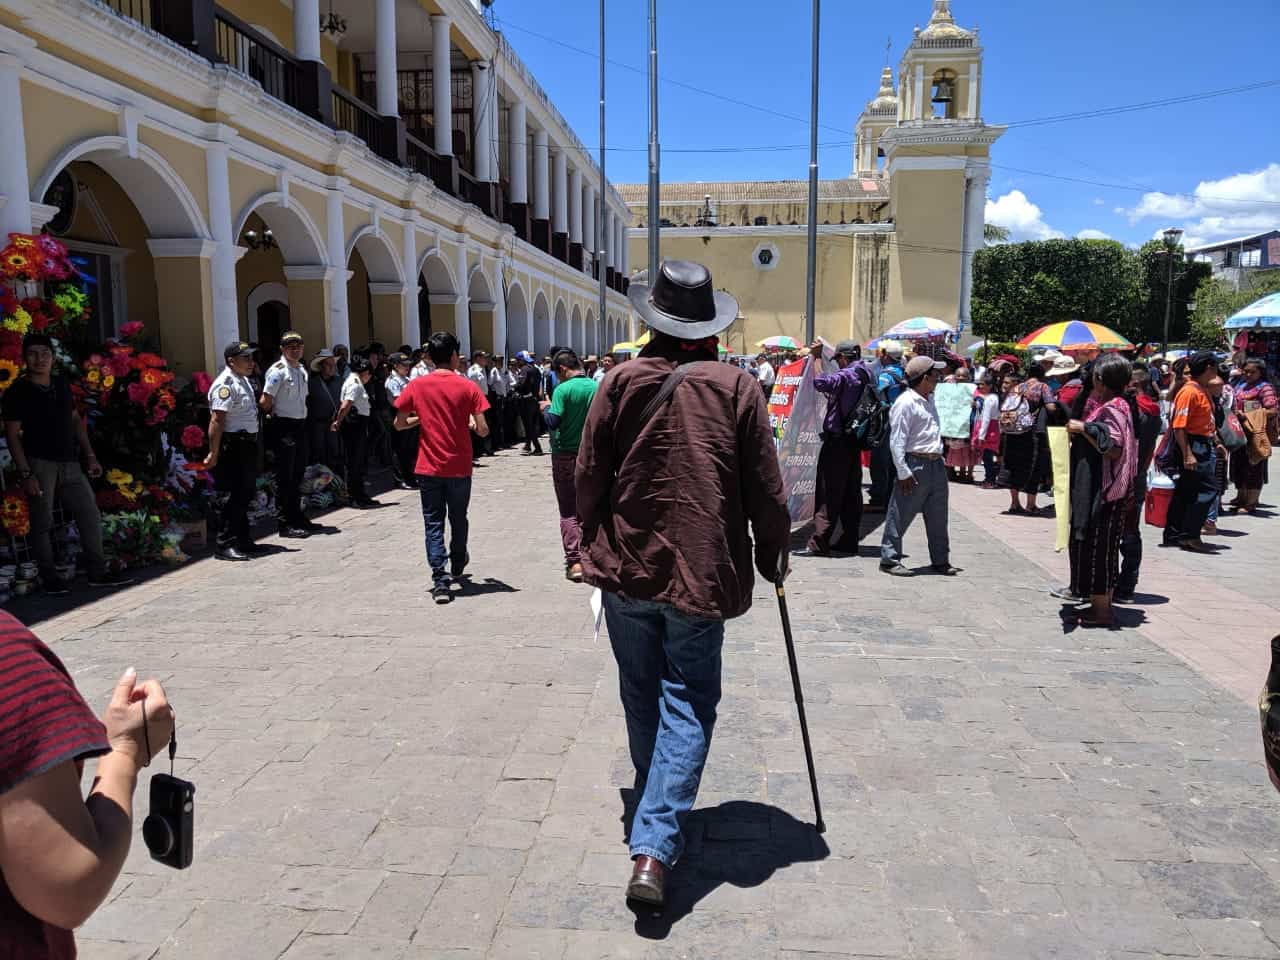 A photograph of Rubén Herrera from behind. He is a tall man walking with dignity and a cane towards a crowd of people. On the right are people holding signs wearing traditional Mayan clothing, on the left a line of police in uniform. 